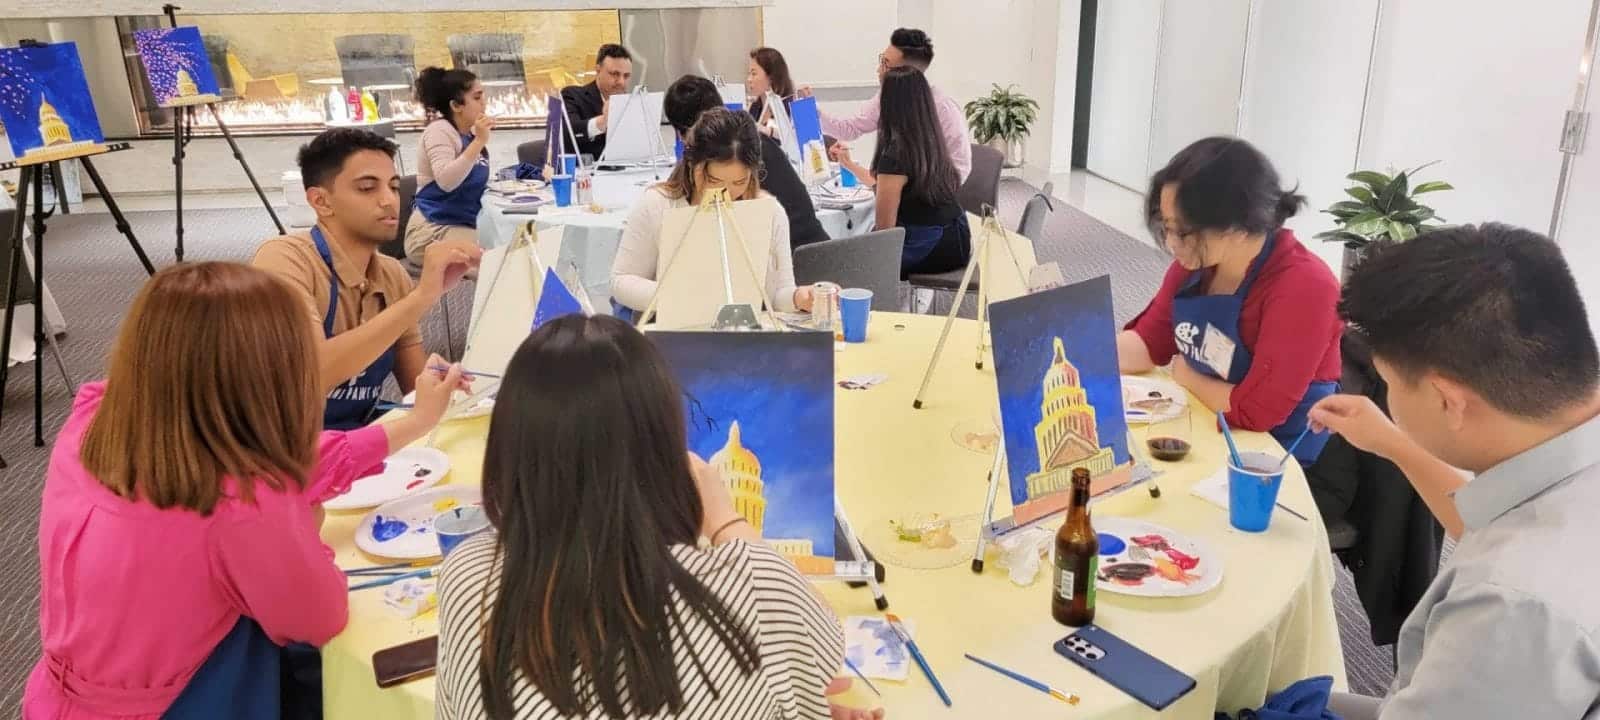 A group of people enjoying a paint and sip session at a table in an office.